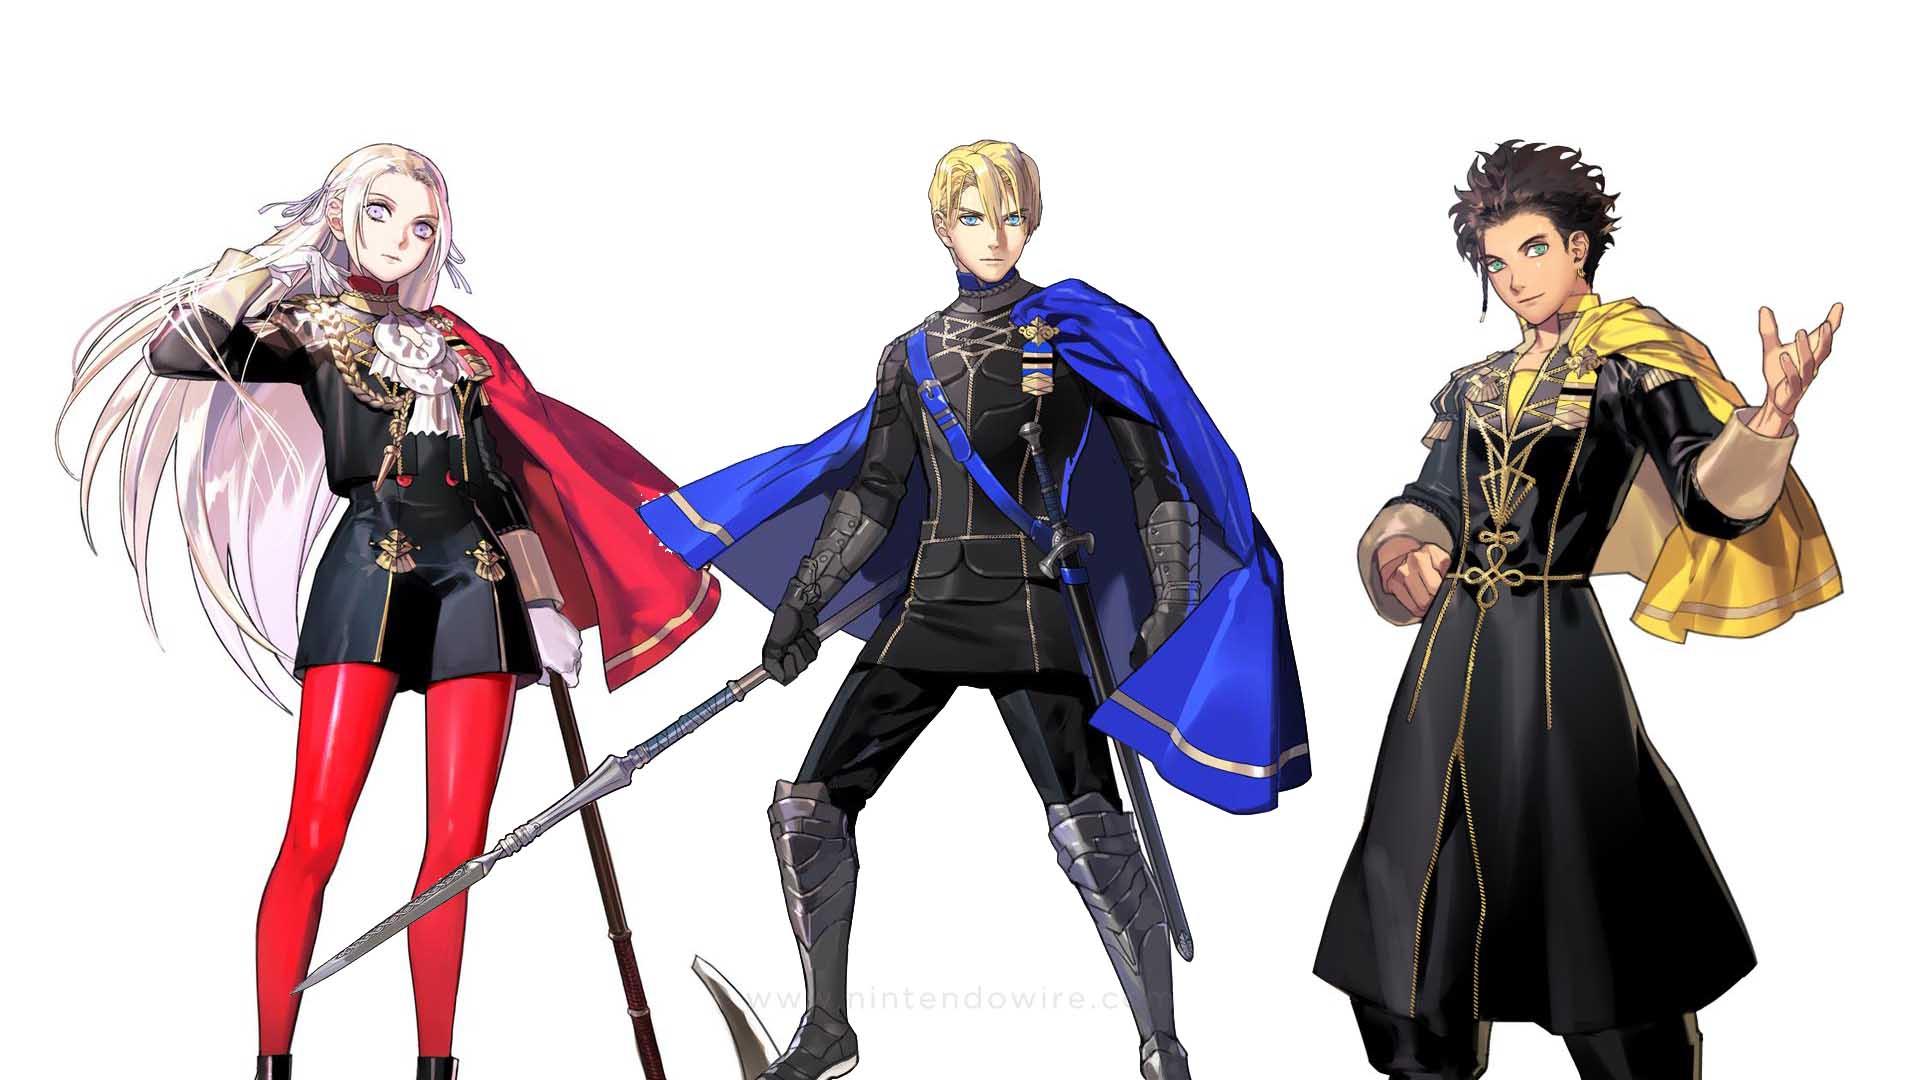 Fire Emblem: Three Houses introduces its core cast of heirs